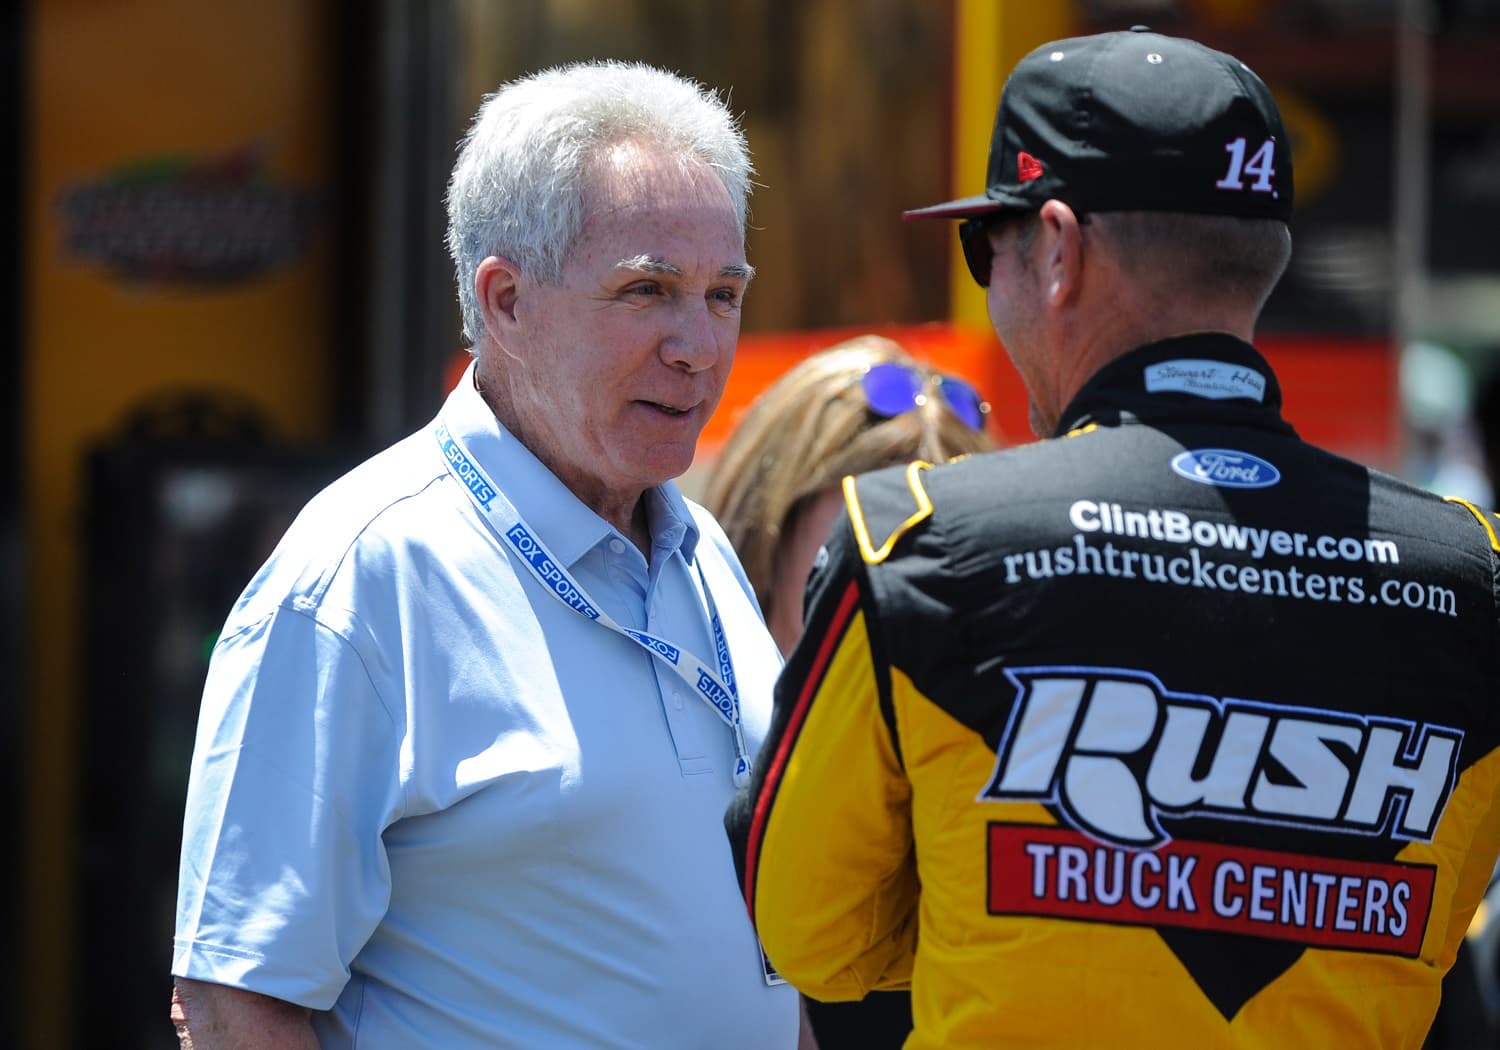 Fox Sports NASCAR Announcer Darrell Waltrip speaks with Clint Bowyer during the NASCAR Cup Series practice for the Toyota/Save Mart 350 on June 21, 2019.